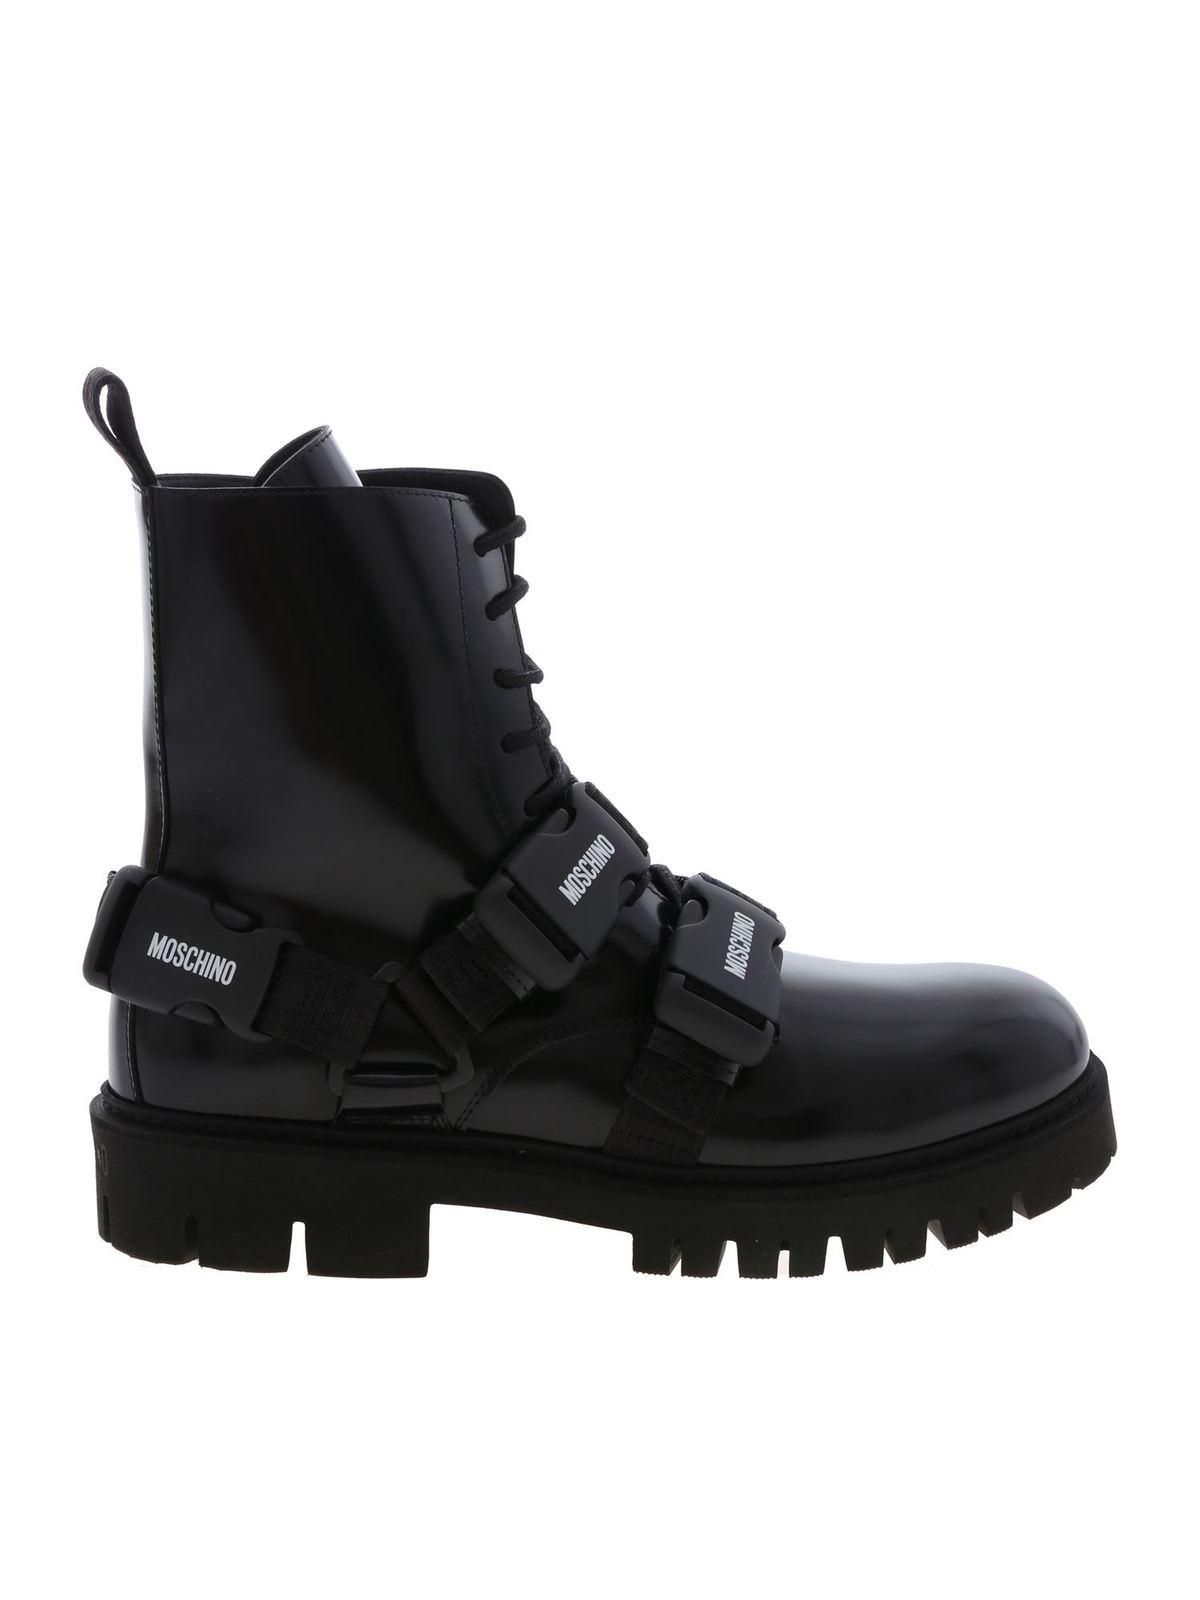 Moschino Leather Black Ankle Boots With Straps for Men - Lyst